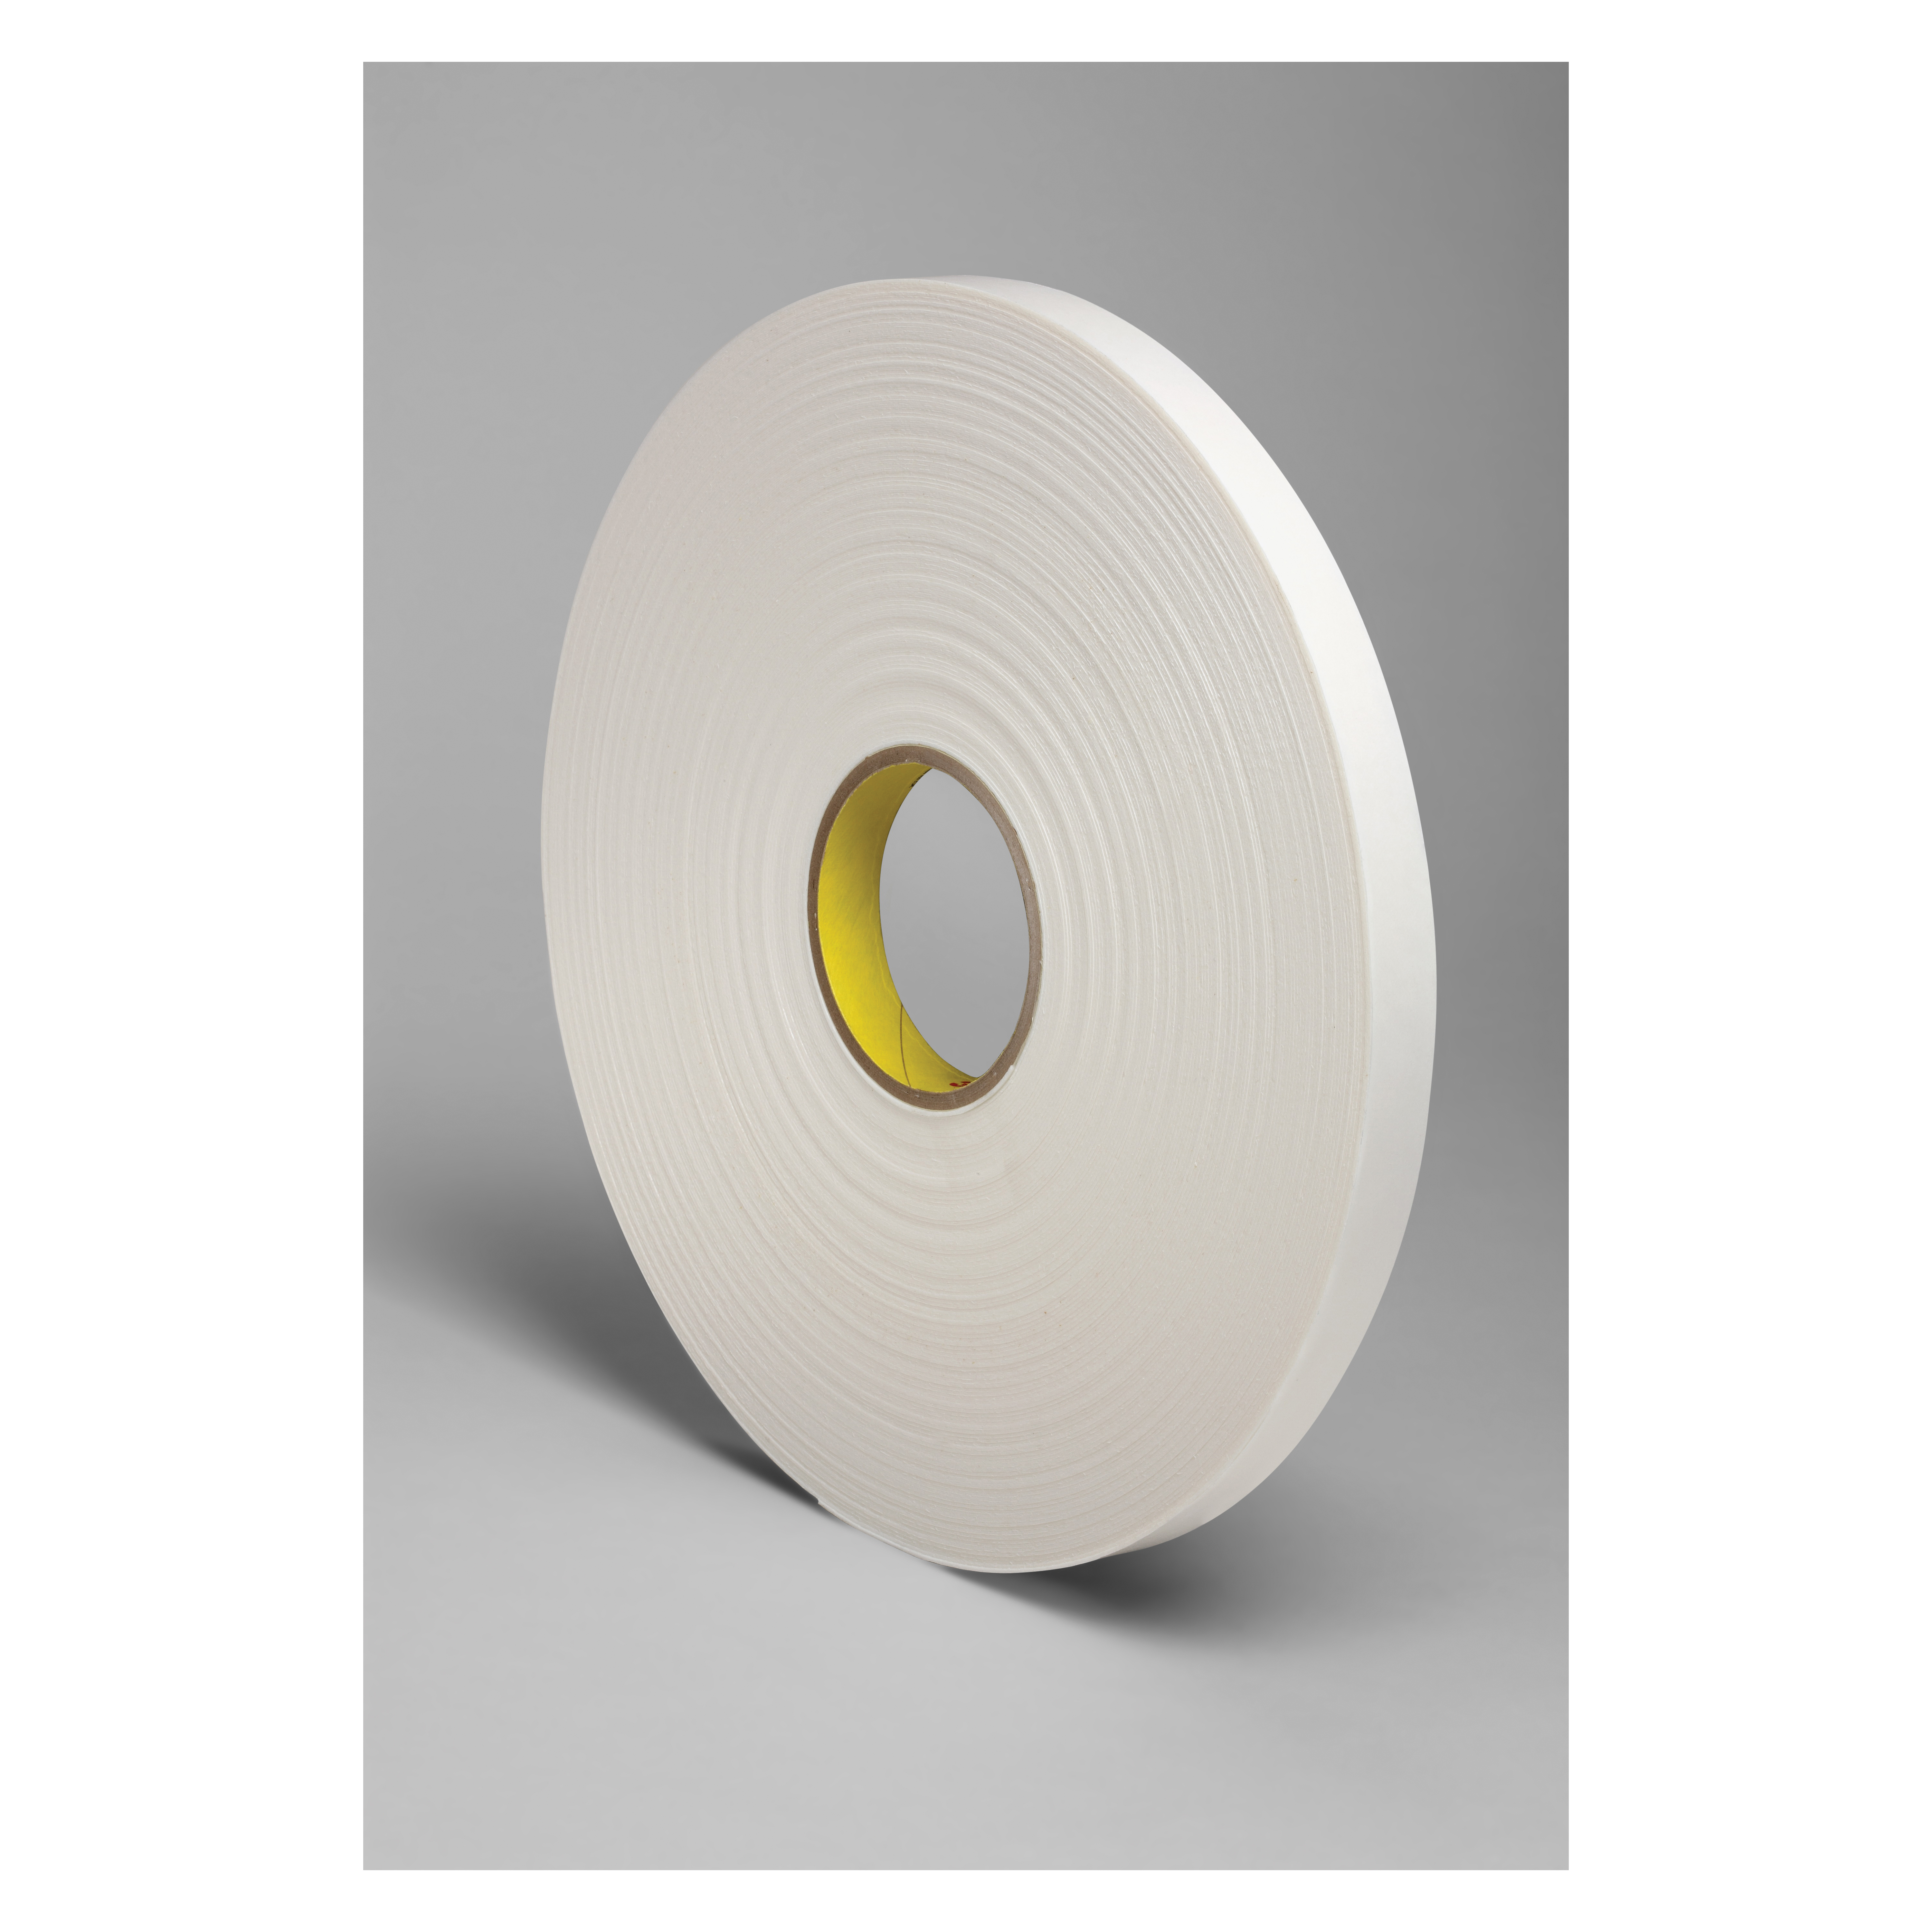 3M™ 021200-03413 Single Coated Foam Tape, 18 yd L x 3/4 in W, 250 mil THK, Acrylic Adhesive, Urethane Foam Backing, Natural